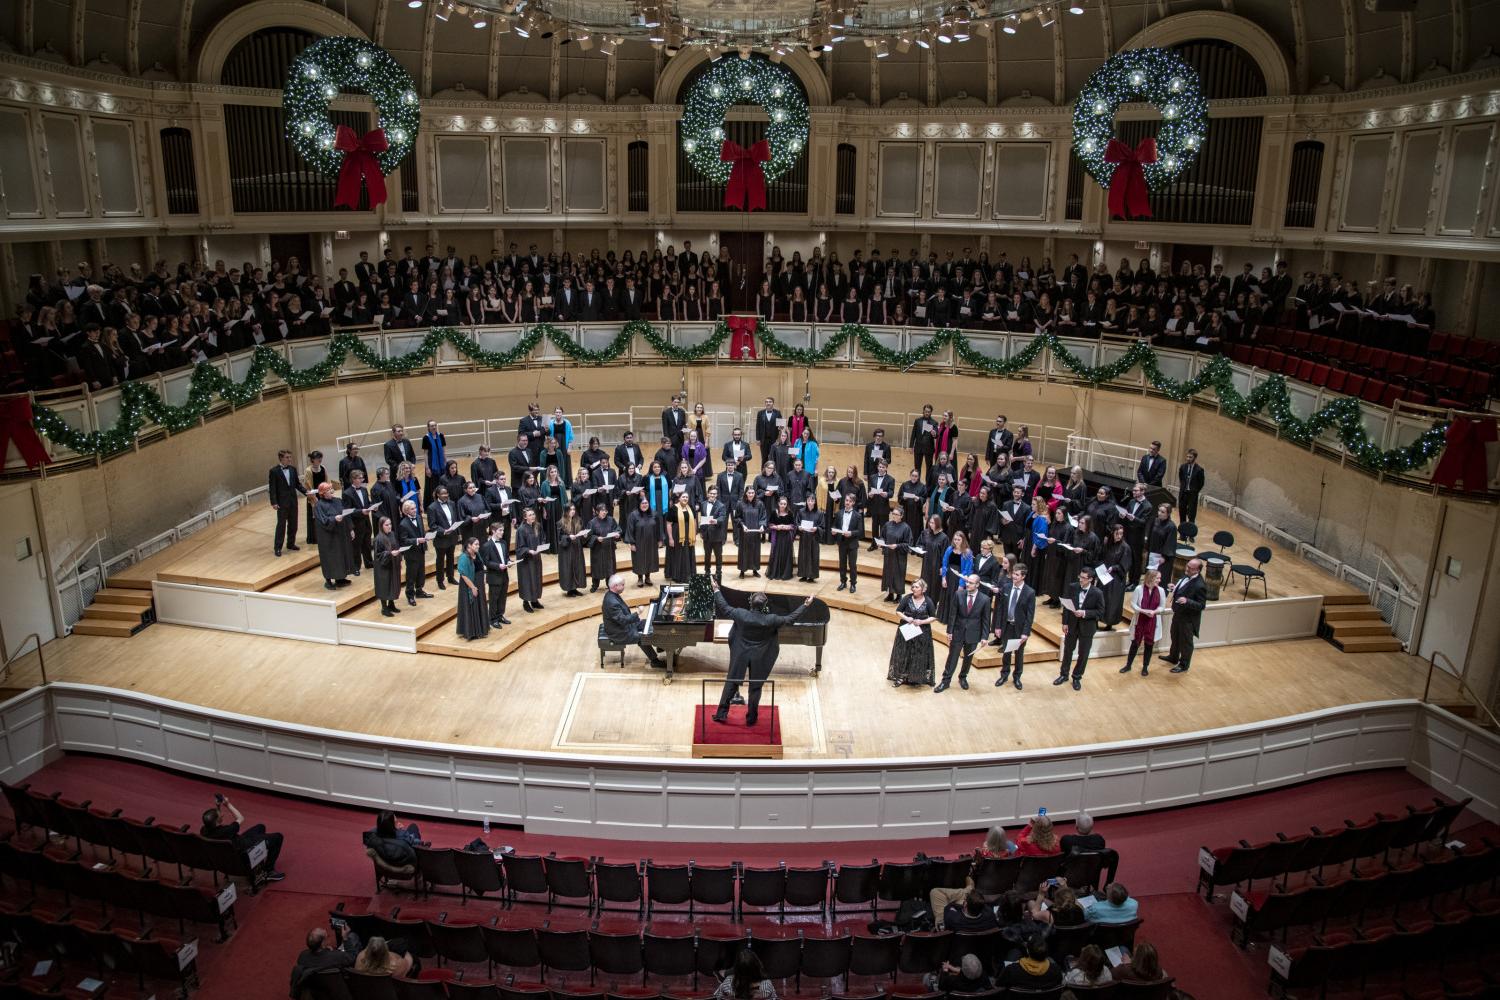 The <a href='http://dqy.frmmd.com'>bv伟德ios下载</a> Choir performs in the Chicago Symphony Hall.